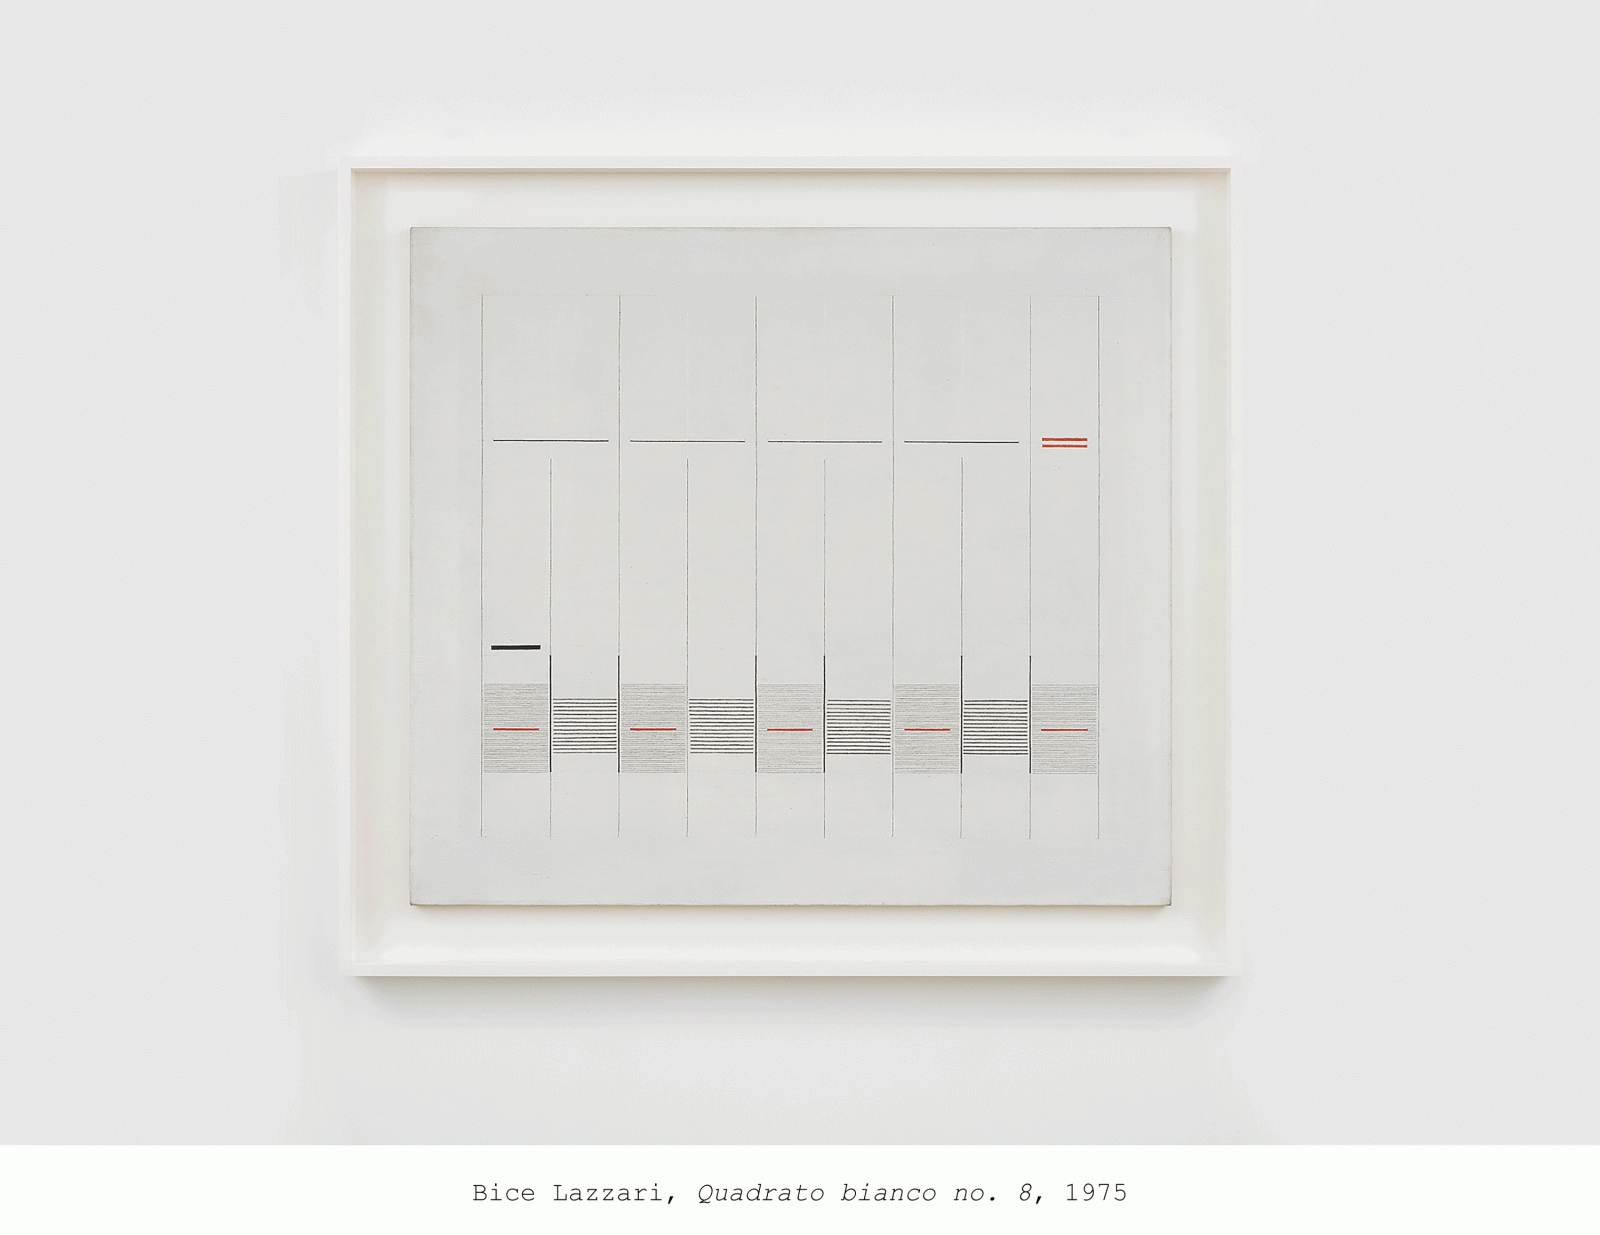 Kaufmann Repetto presents Bice Lazzari The Mark & The Measure Selected Works from 1939-1981